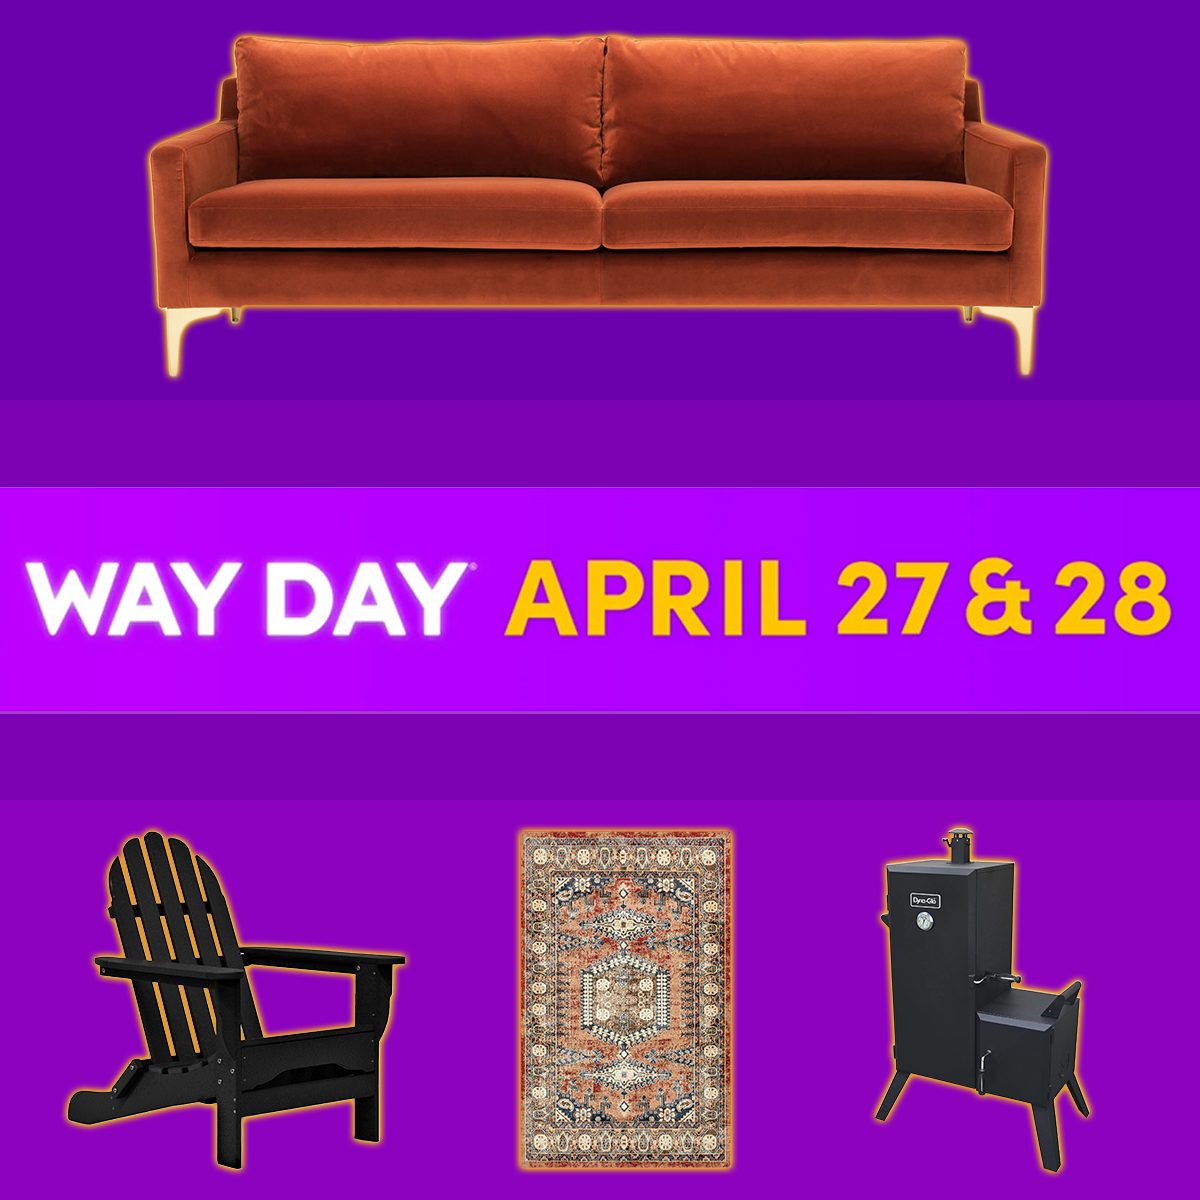 Wayfair Way Day 2022 Is Here! Here's What You Need to Know